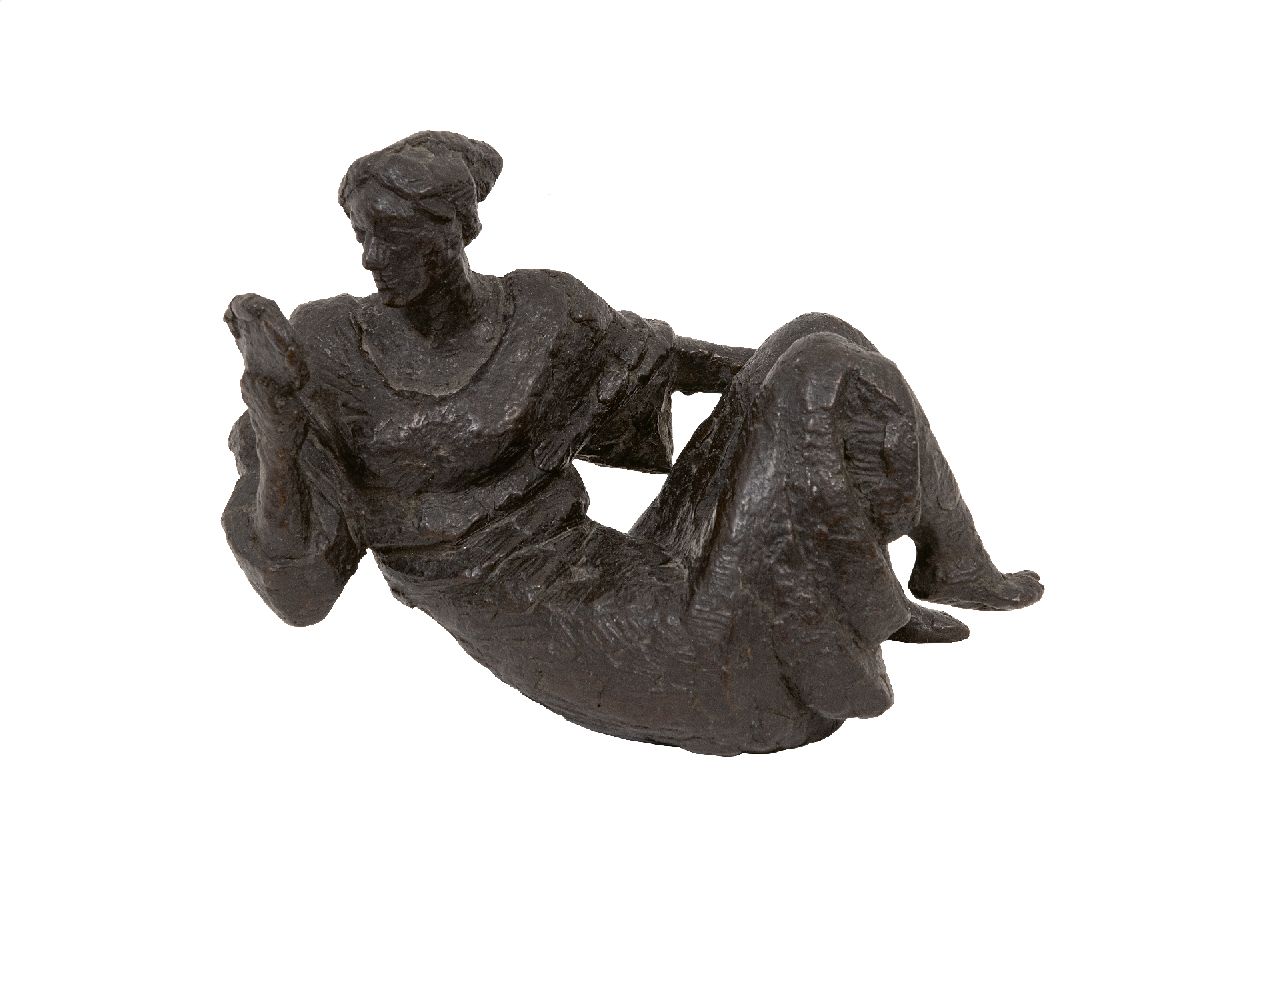 Onbekend Duitse School  | Onbekend | Sculptures and objects offered for sale | Reclining lady with handmirror, bronze 14.0 x 20.0 cm